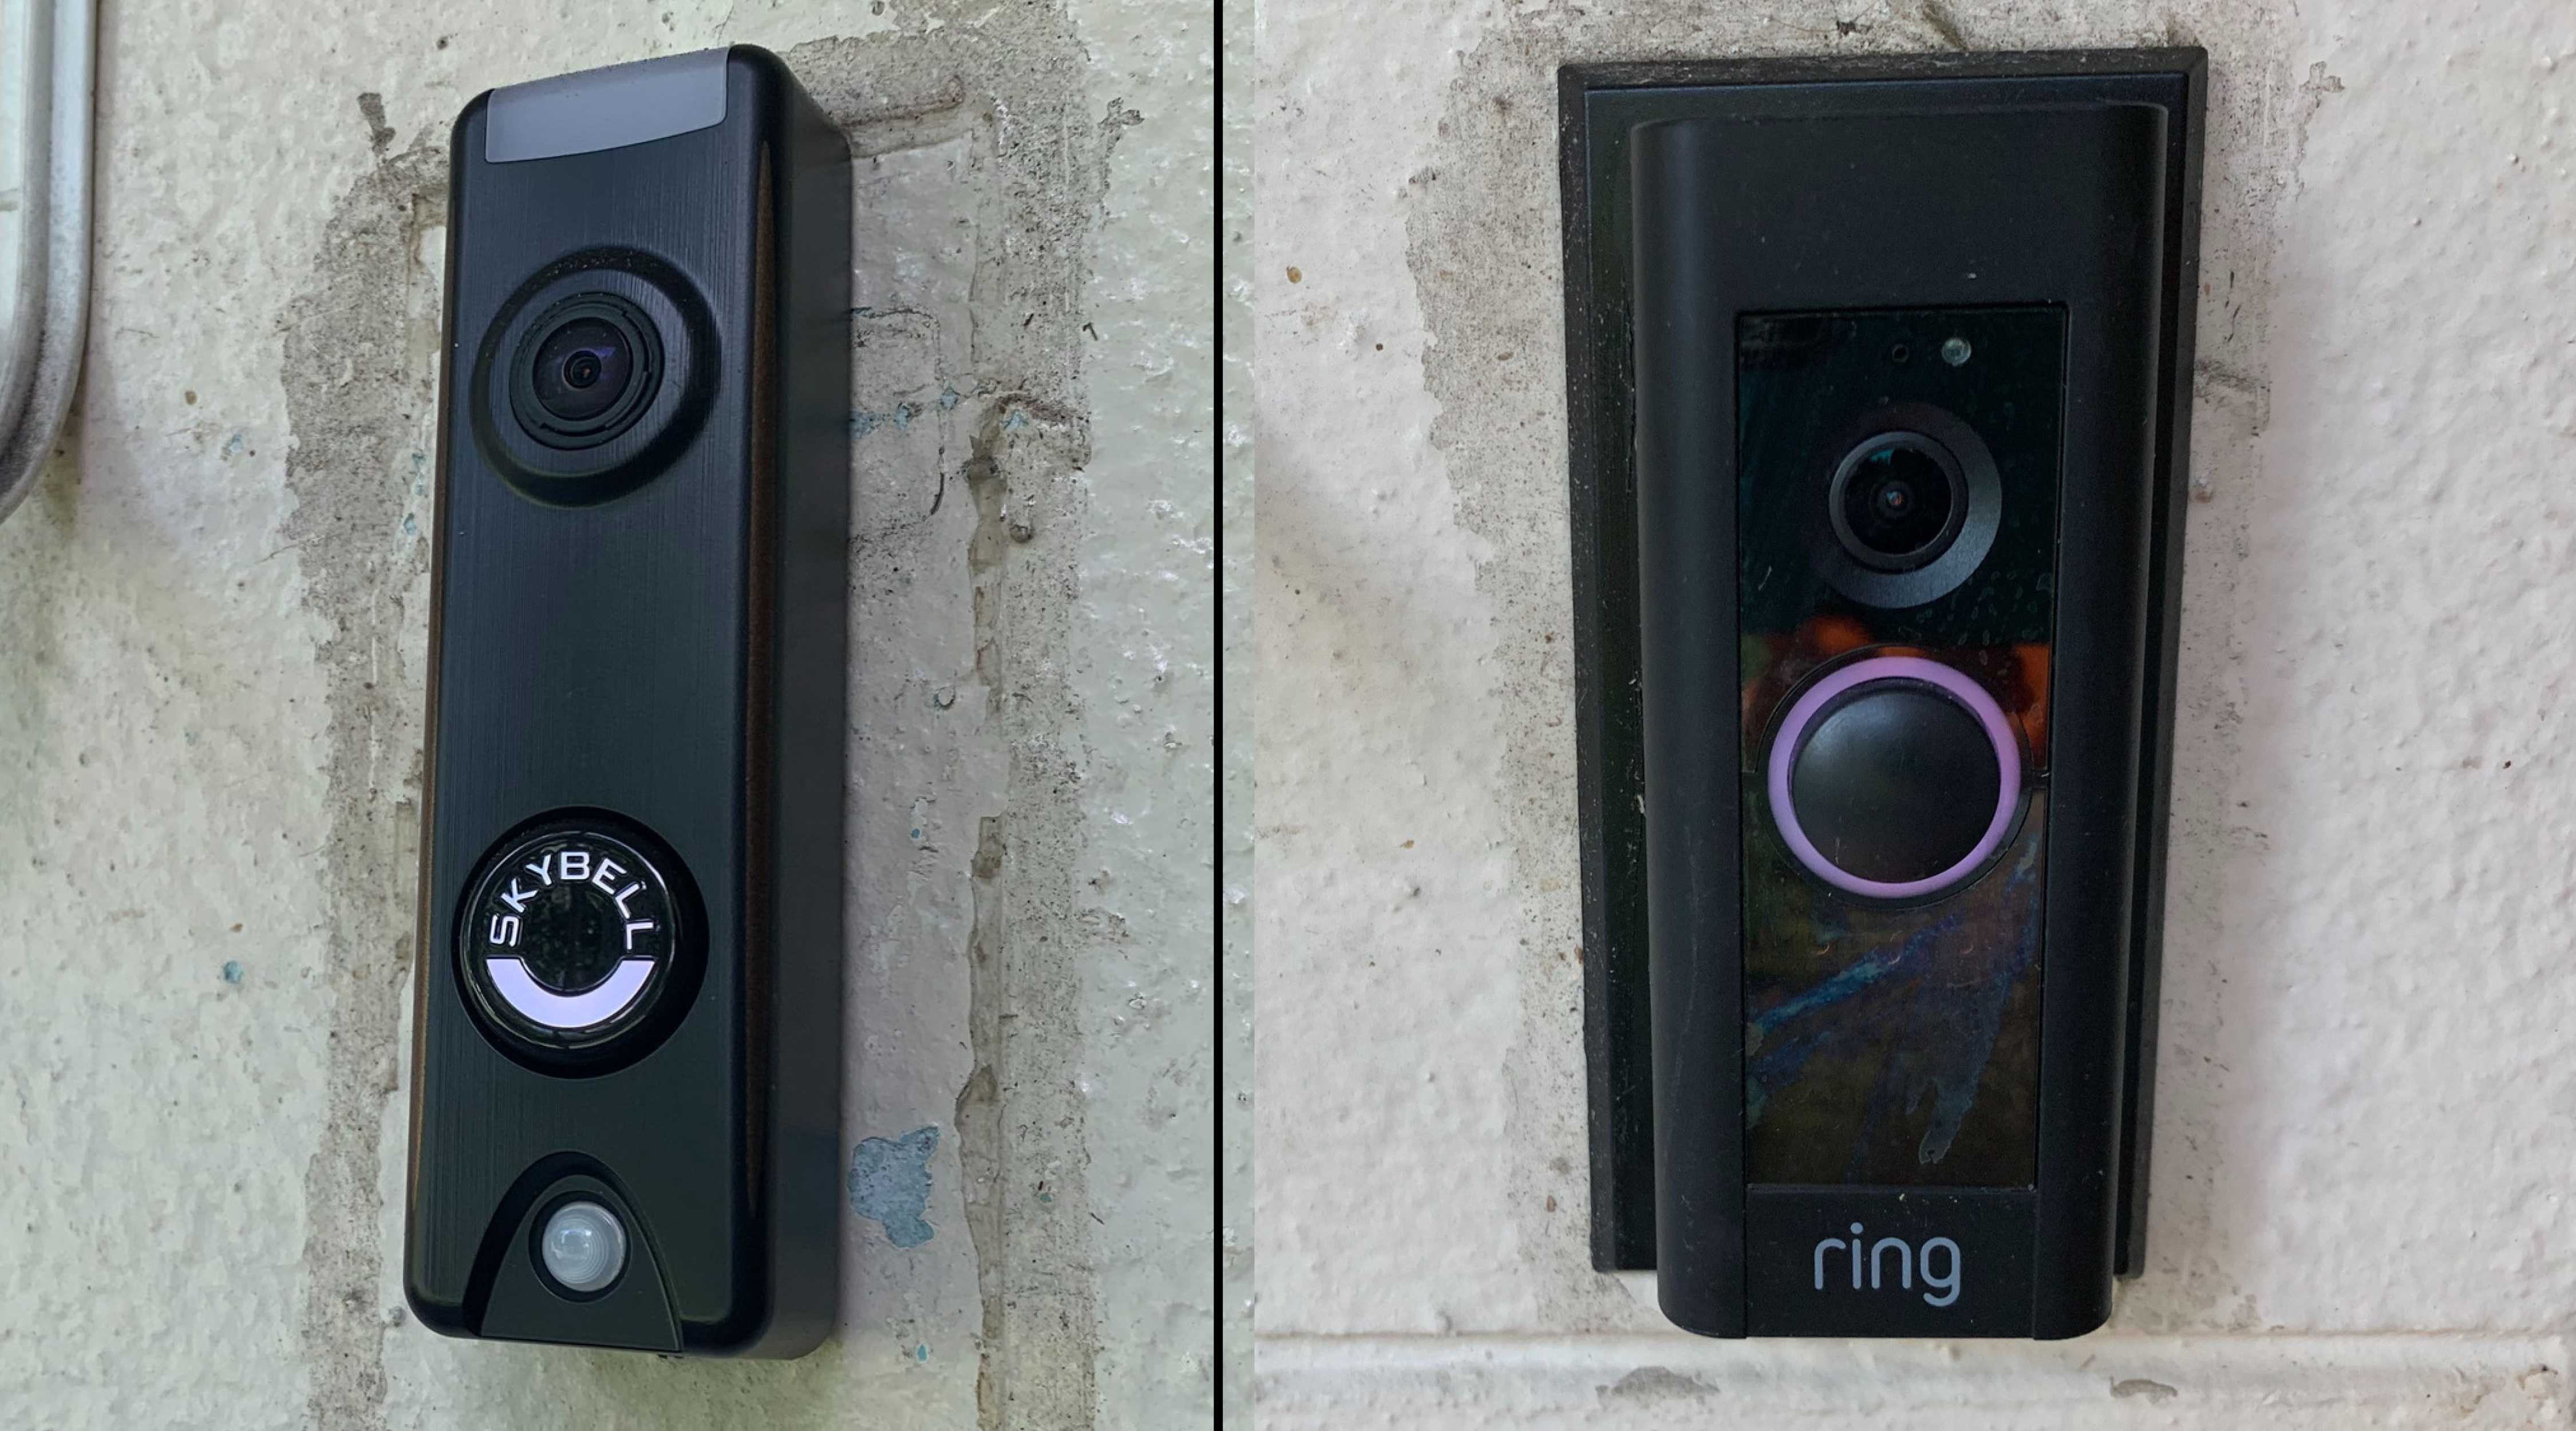 Skybell Trim Plus Ring Video Pro